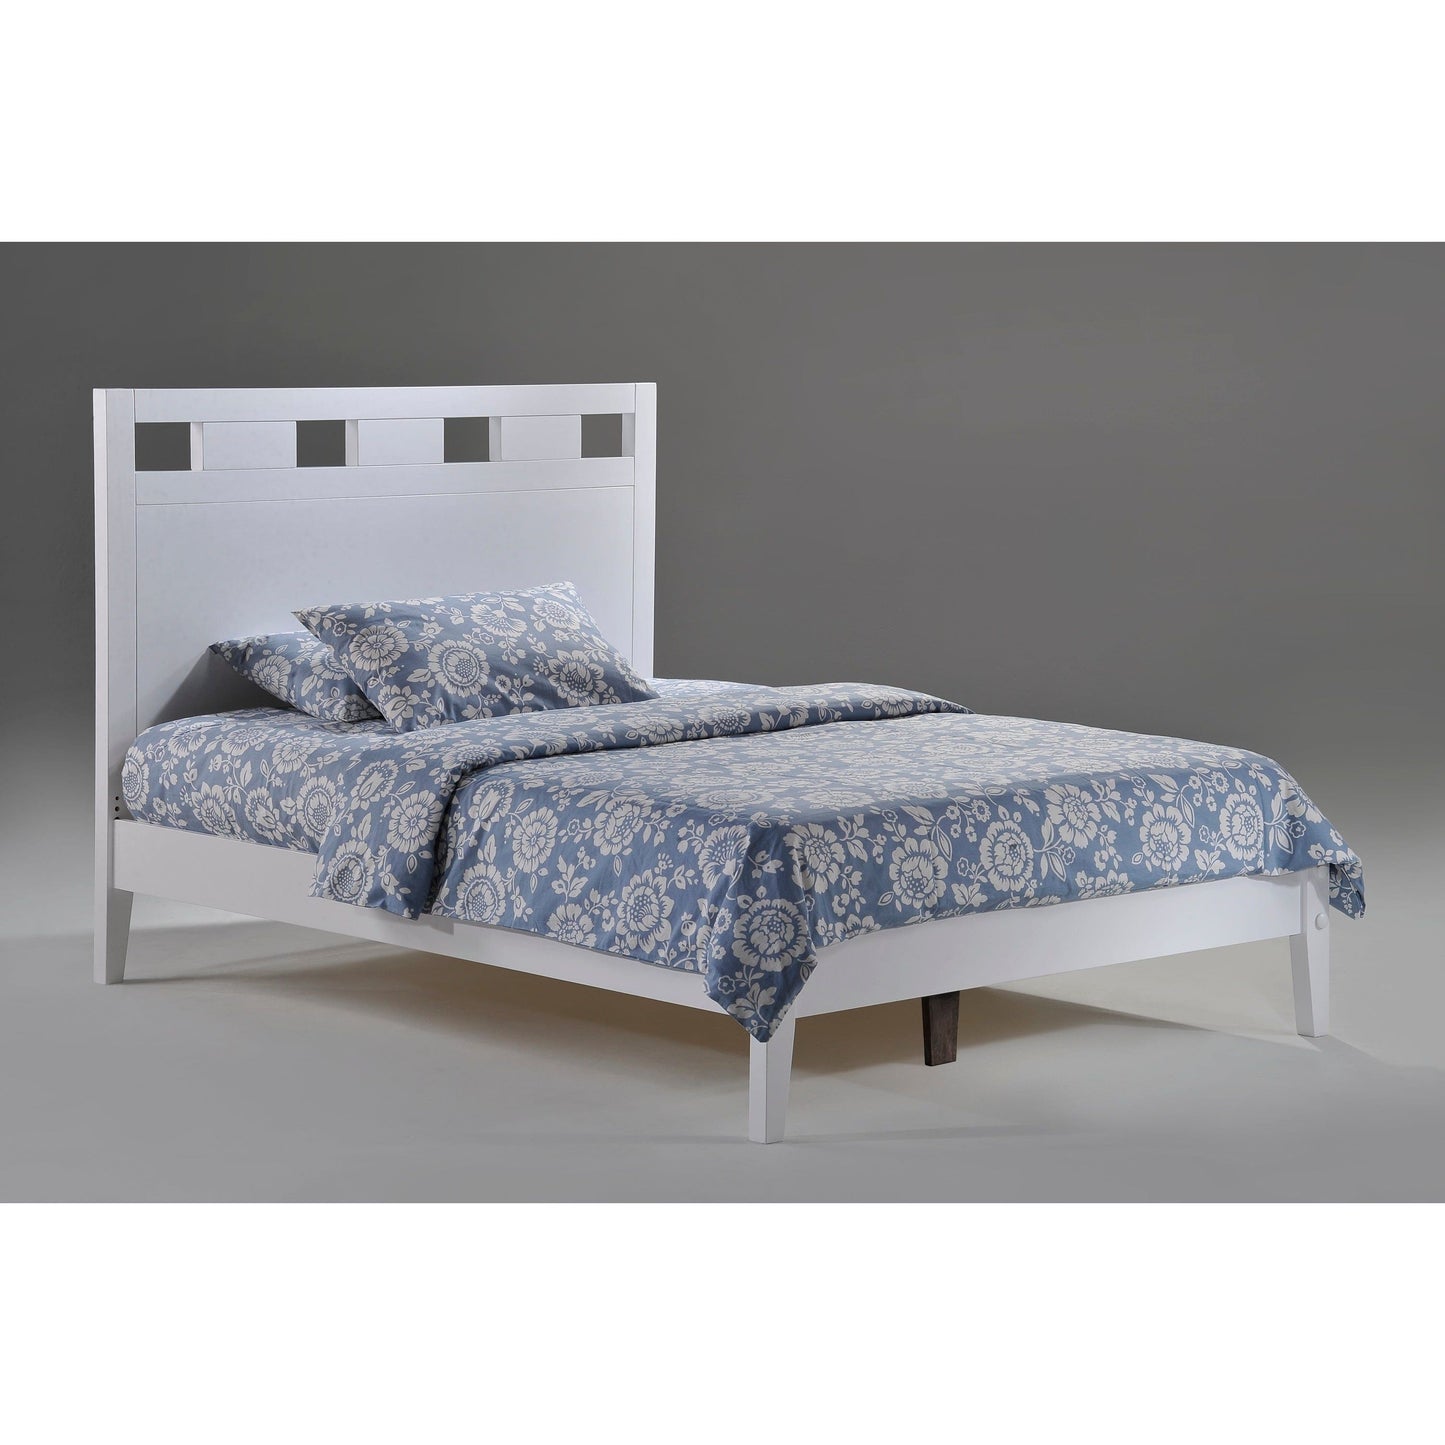 Night And Day Twin Tamarind Bed (P Series) in cherry finish TAM-PH-TWN-CH-COM